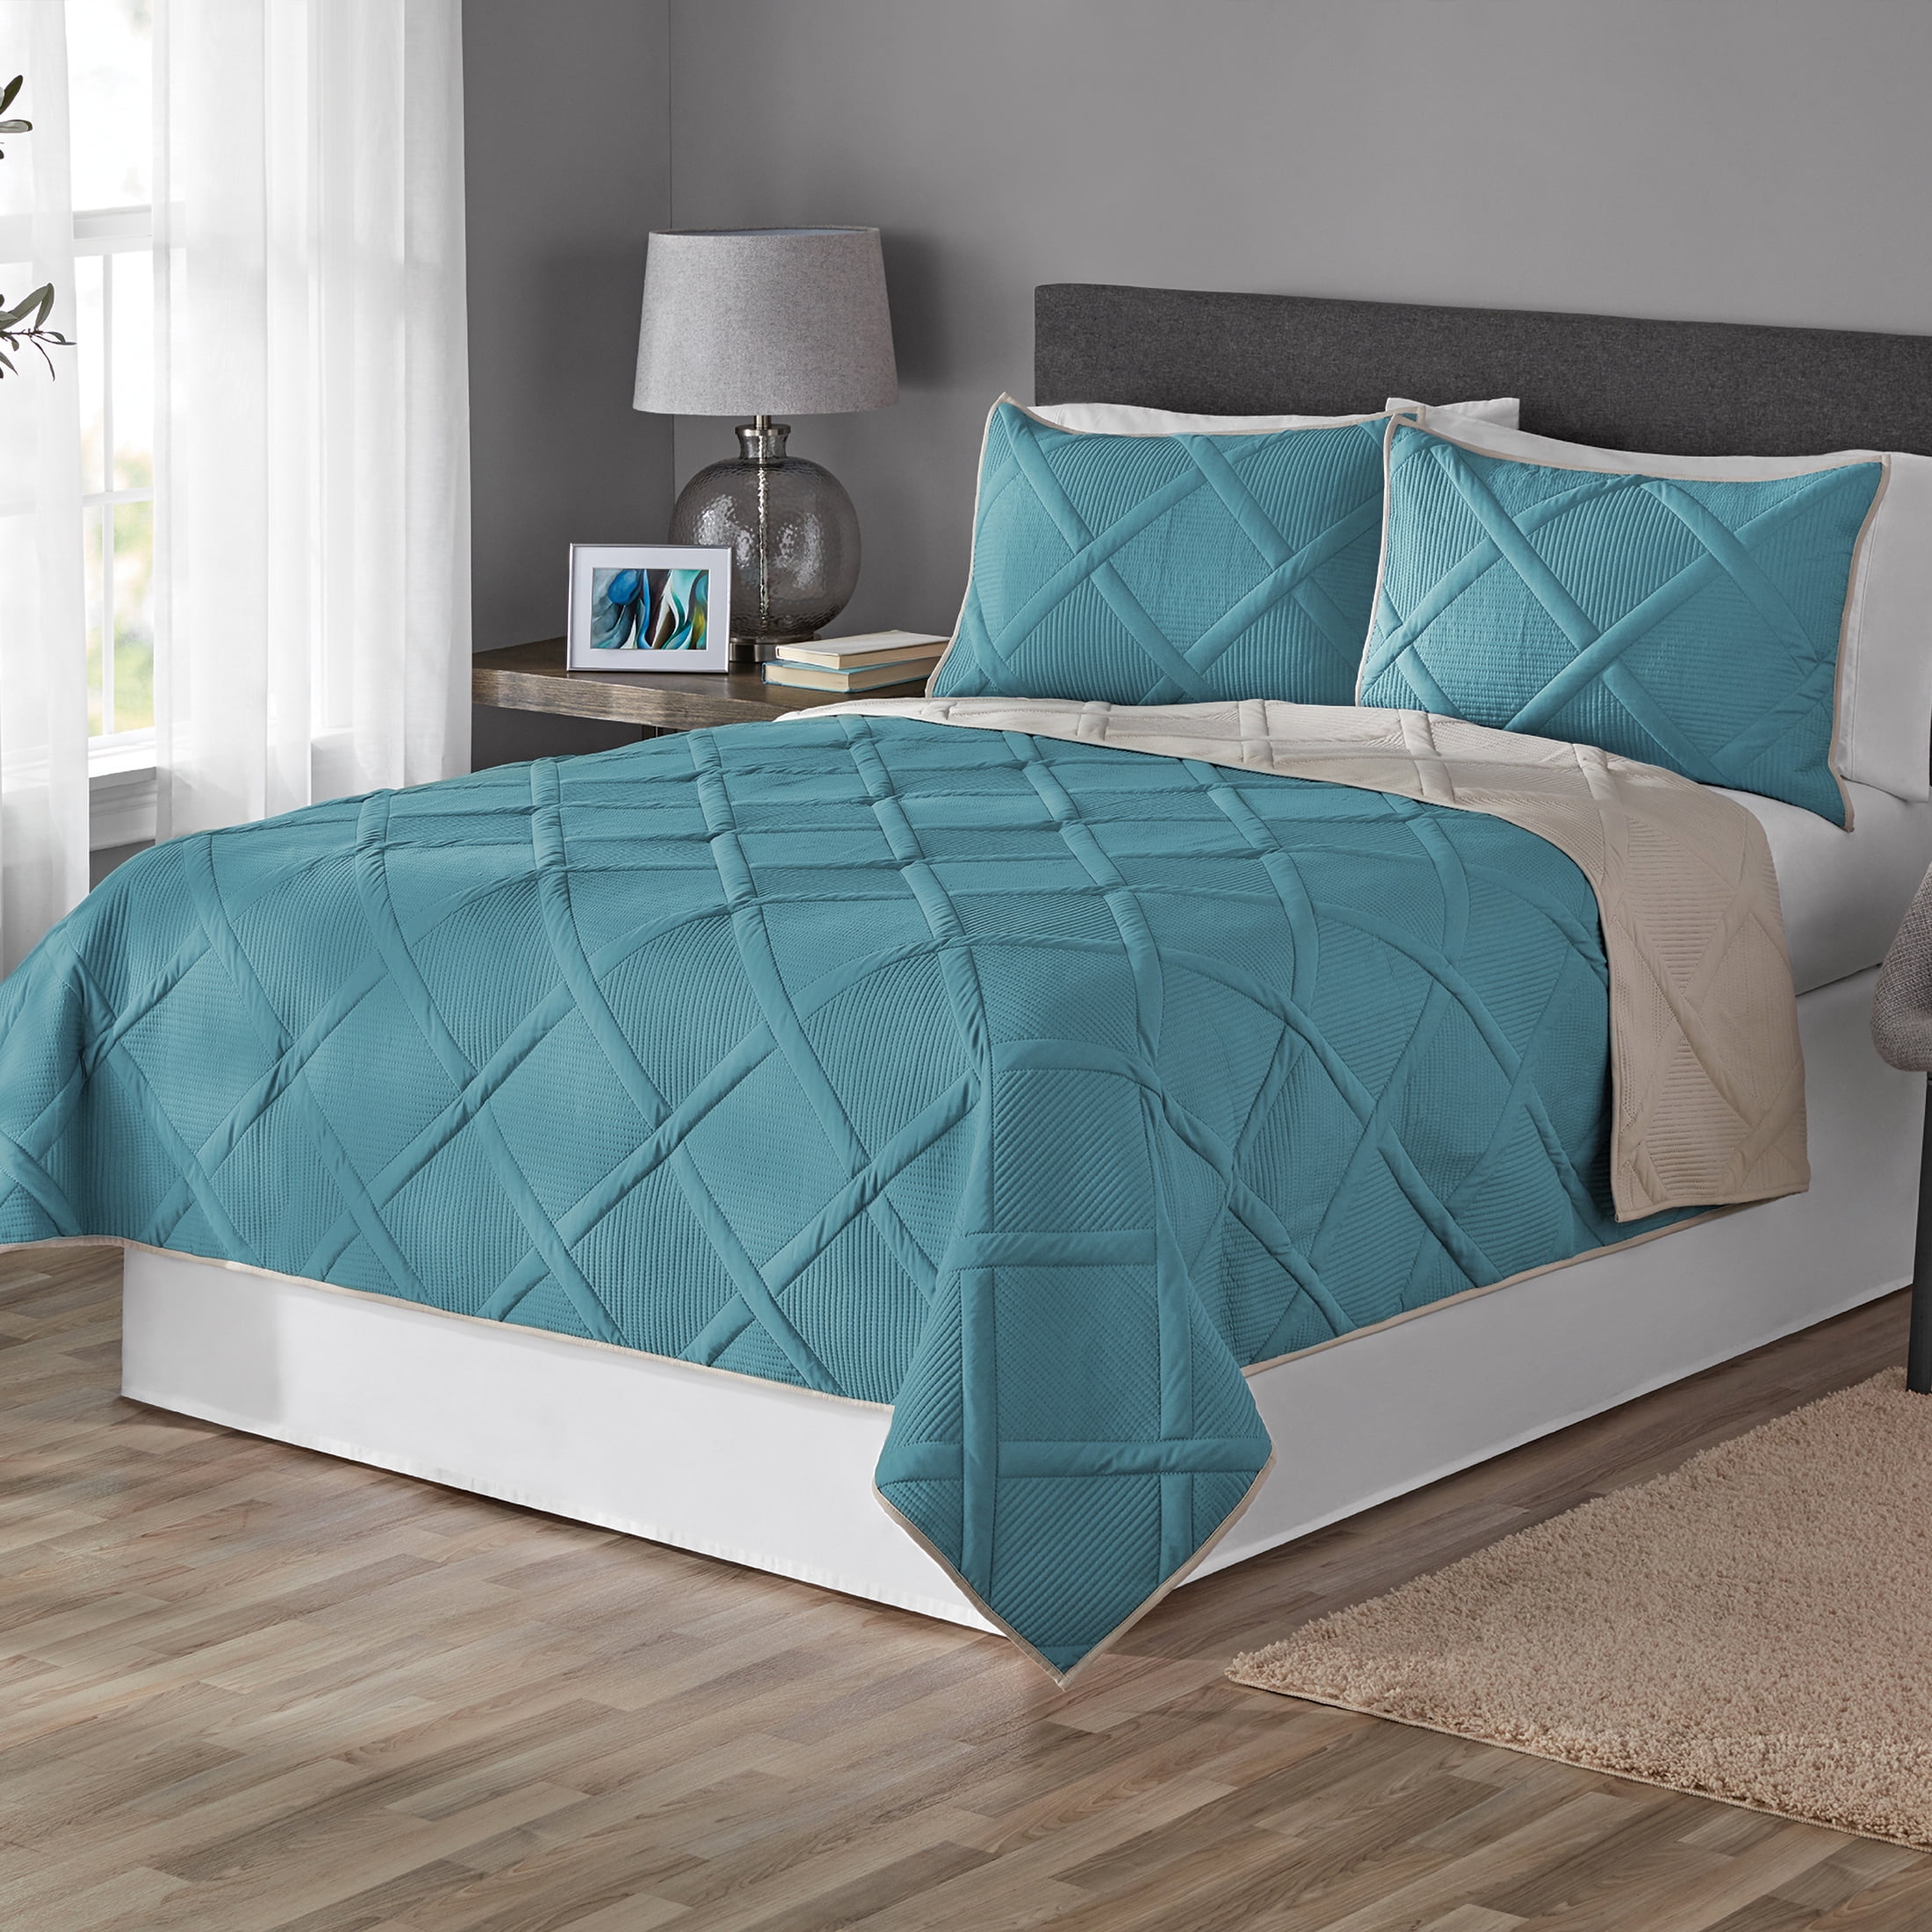 Mainstays Diamond Teal Argyle Polyester Quilt, Full/Queen, Reversible